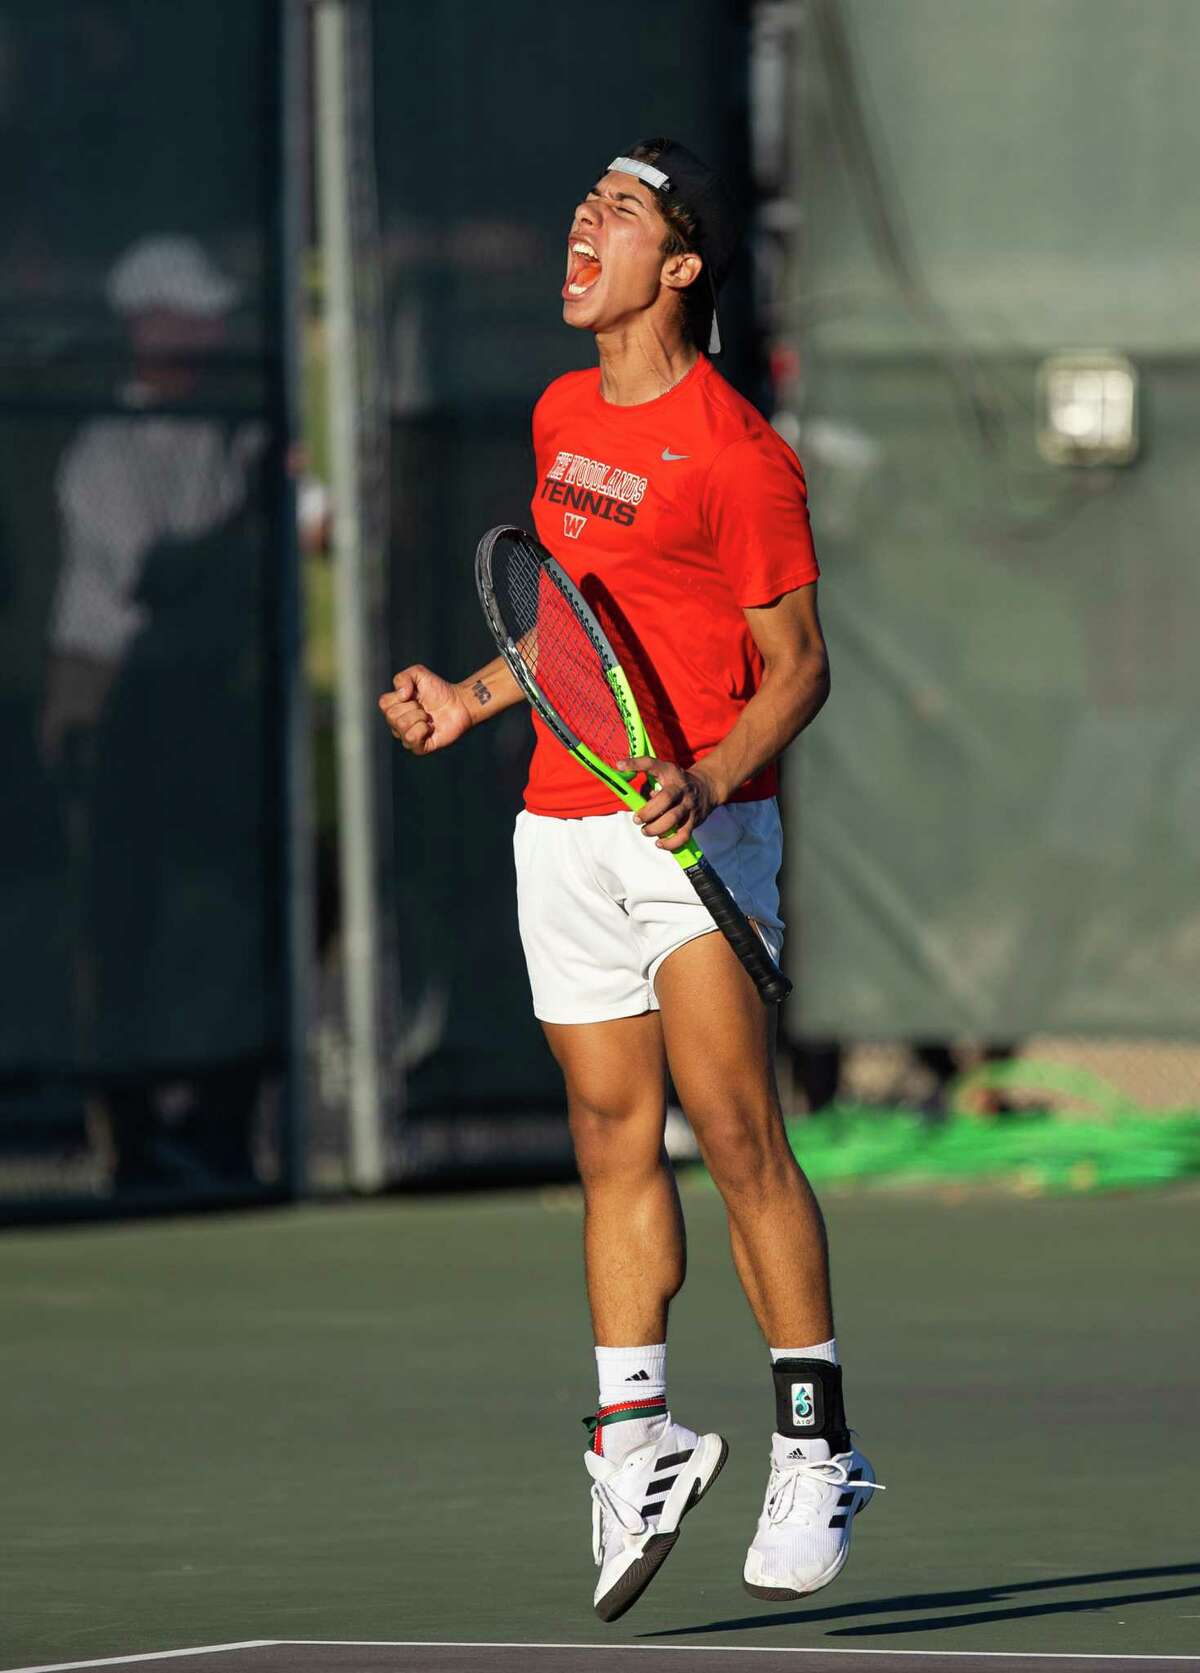 The Woodlands’ Jose Perez celebrates during a doubles match with partner Felipe Rameriz against Memorial’s Christopher Langford and Nate Raney in the Class 6A tennis state championship semifinals at the George P. Mitchell and Omar Smith Intramural Tennis Centers at Texas A&M University in College Station on Wednesday, October 26, 2022. Perez and Rameriz won the match 6-3, 7-6(2). (Cassie Stricker / The Chronicle)